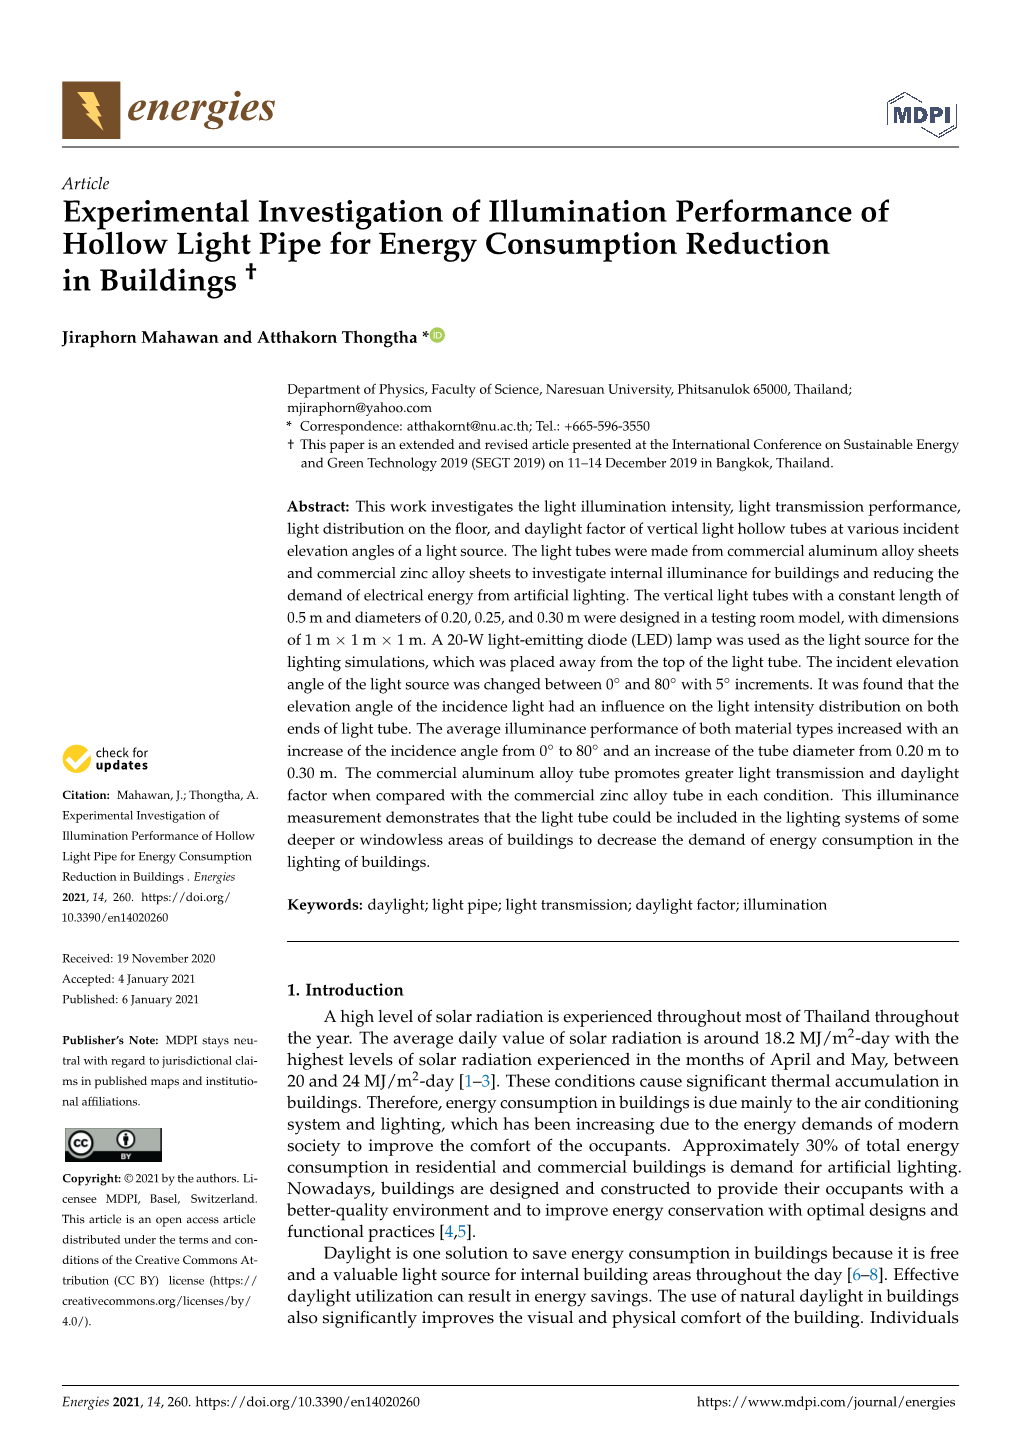 Experimental Investigation of Illumination Performance of Hollow Light Pipe for Energy Consumption Reductionin Buildings